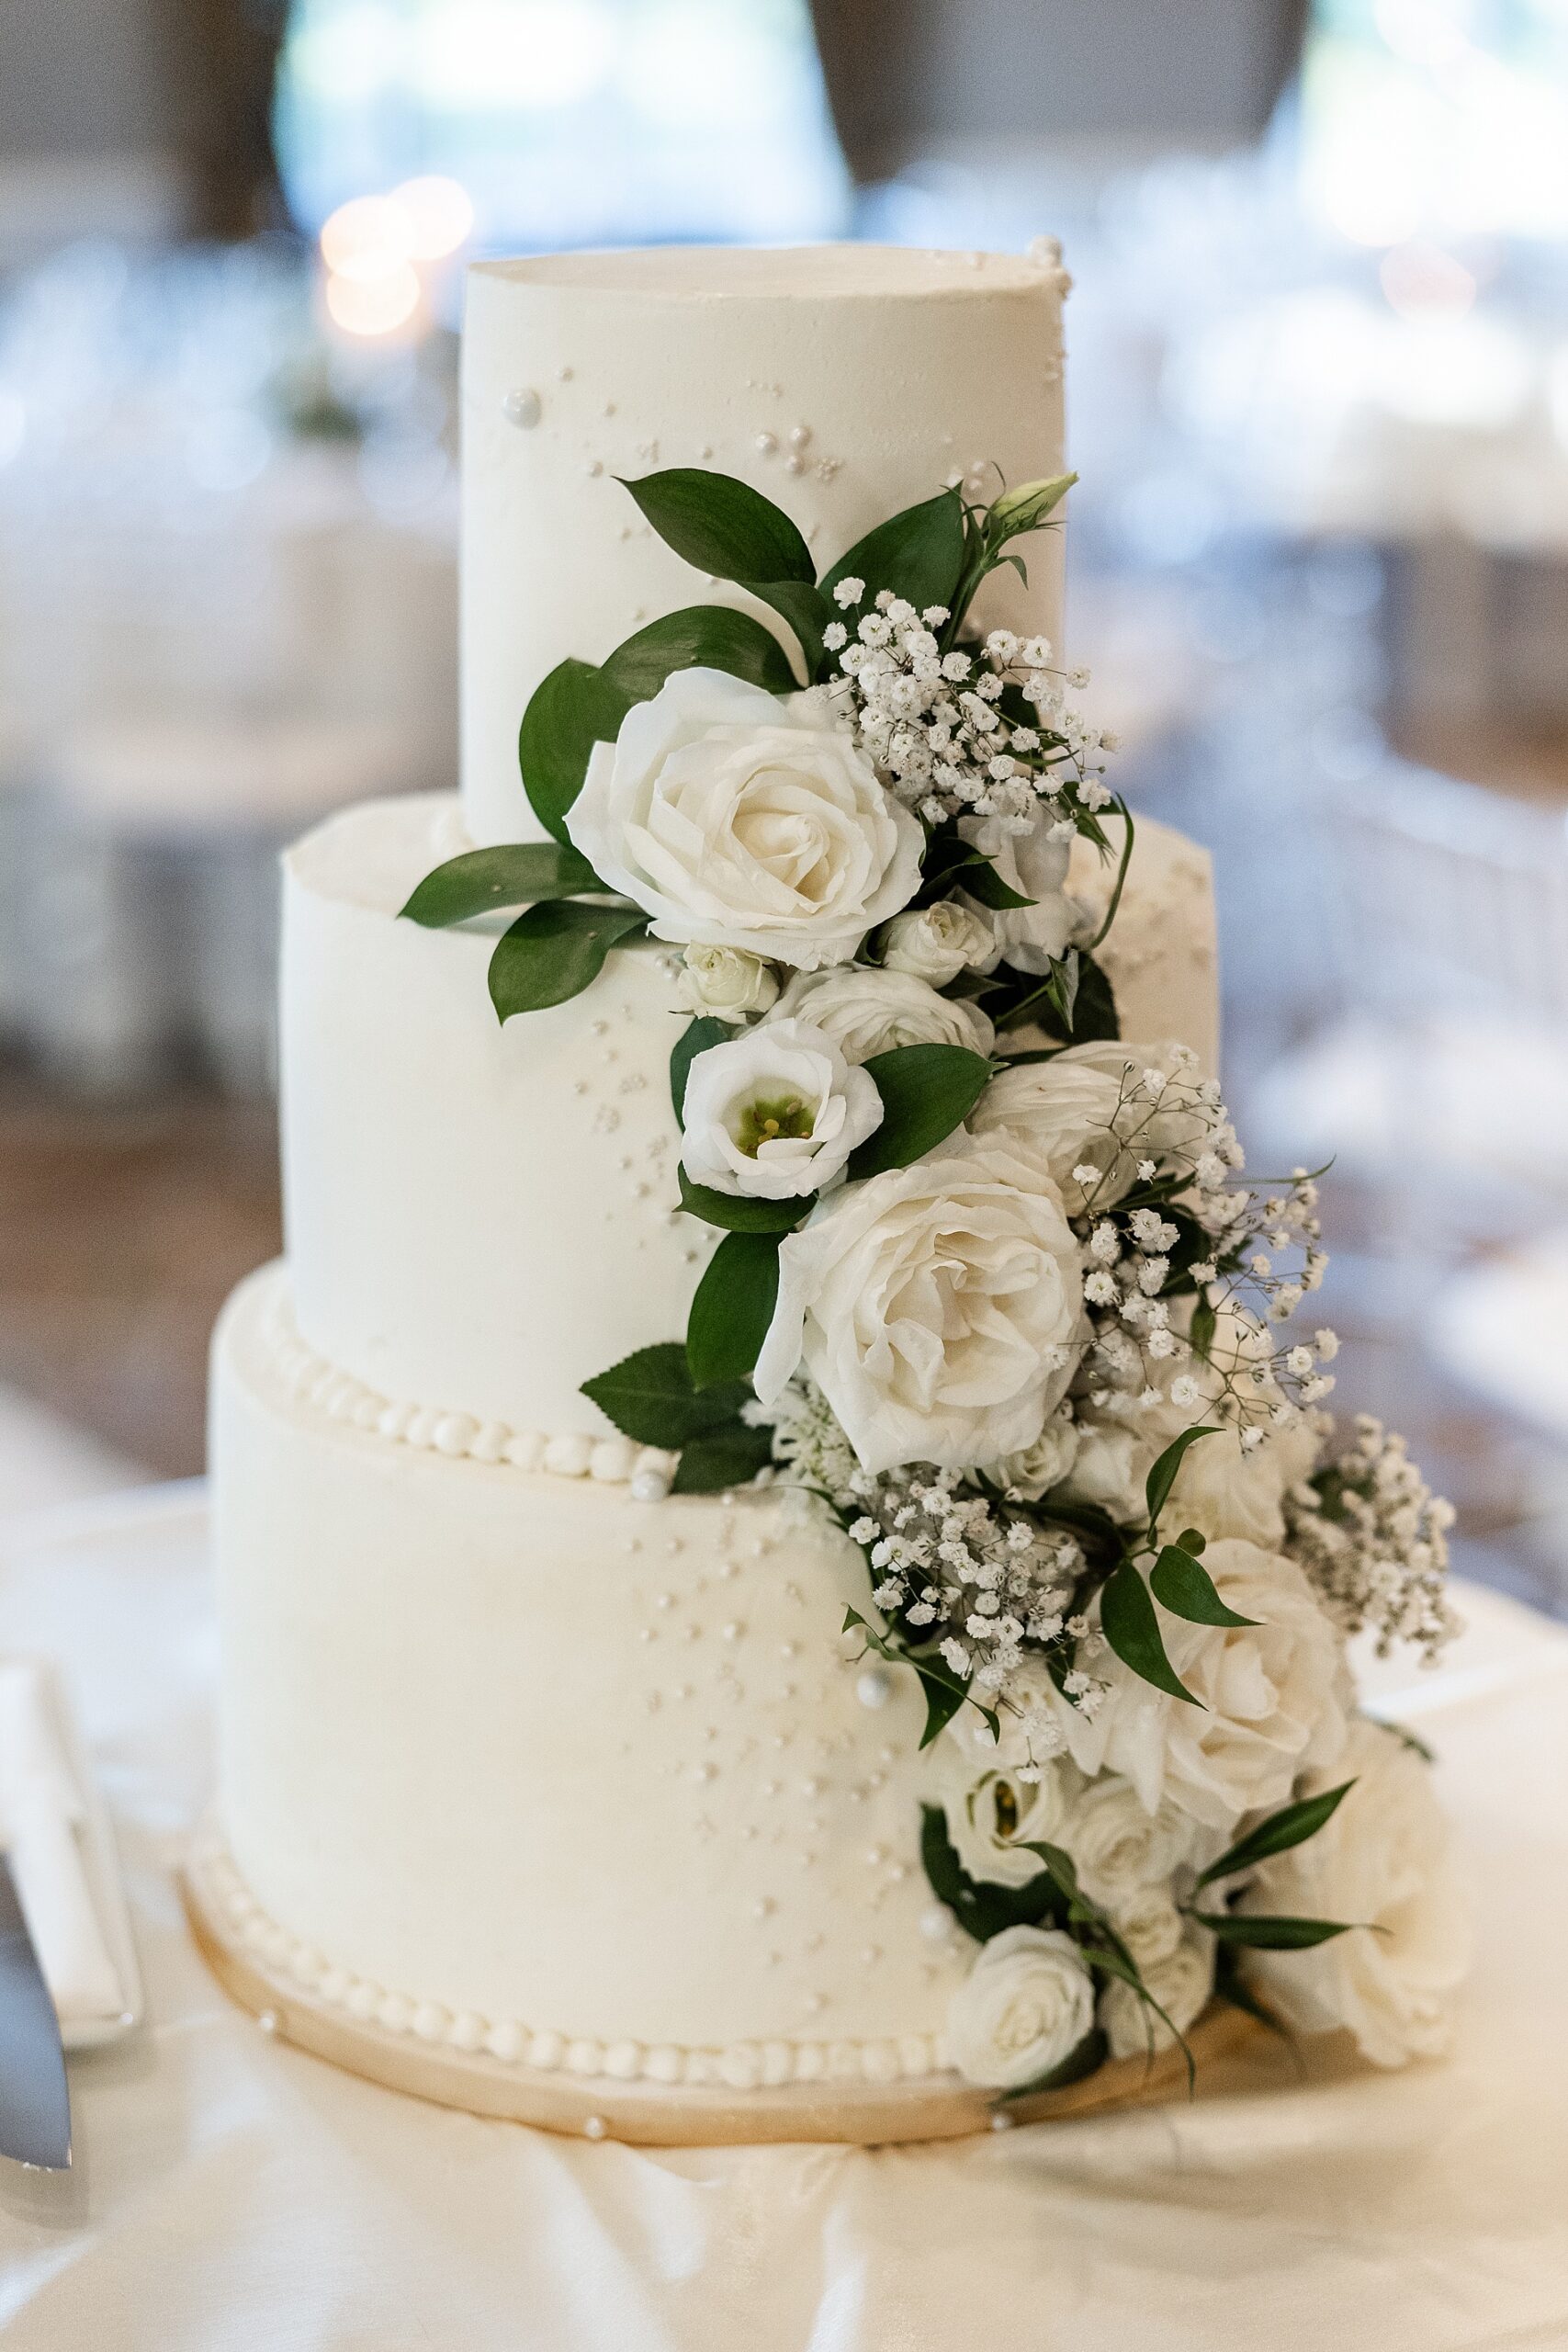 classic wedding cake decorated with white flowers